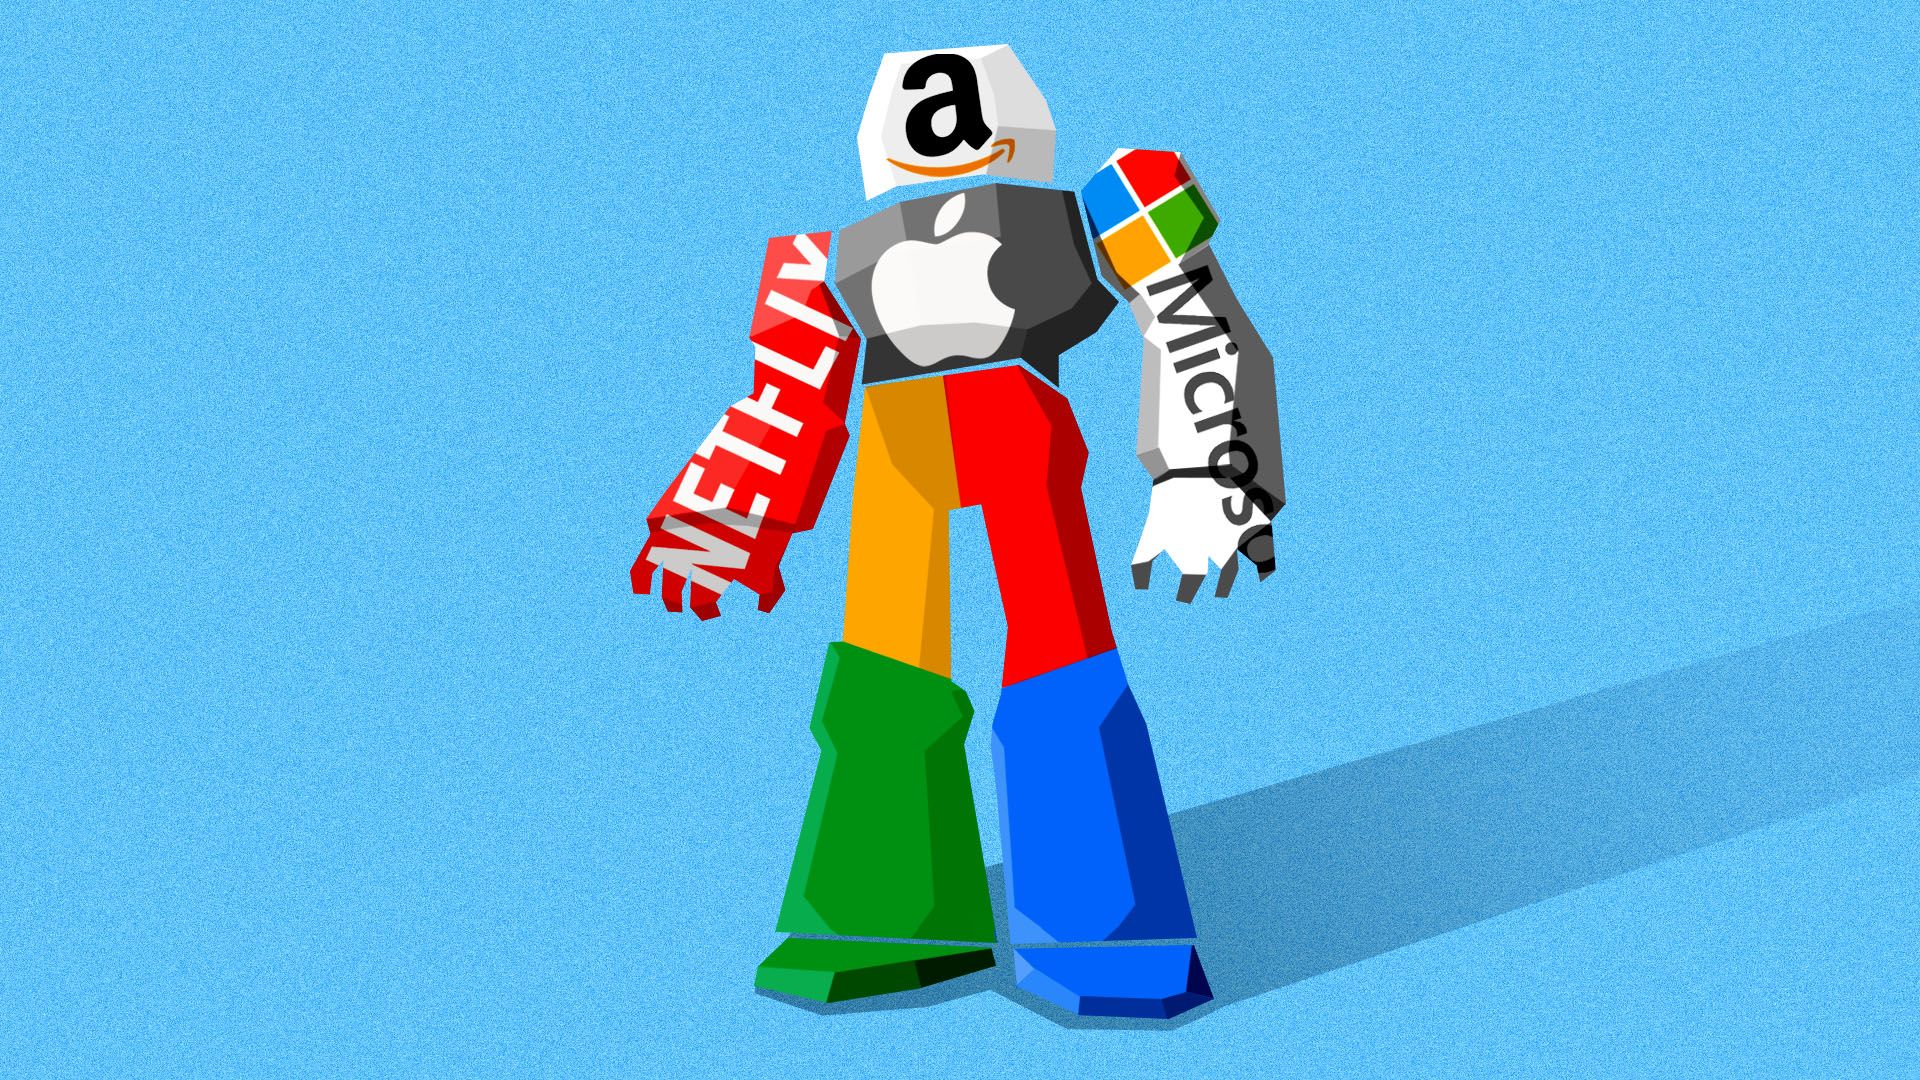 Illustration of a giant robot made up of the logos of big tech companies